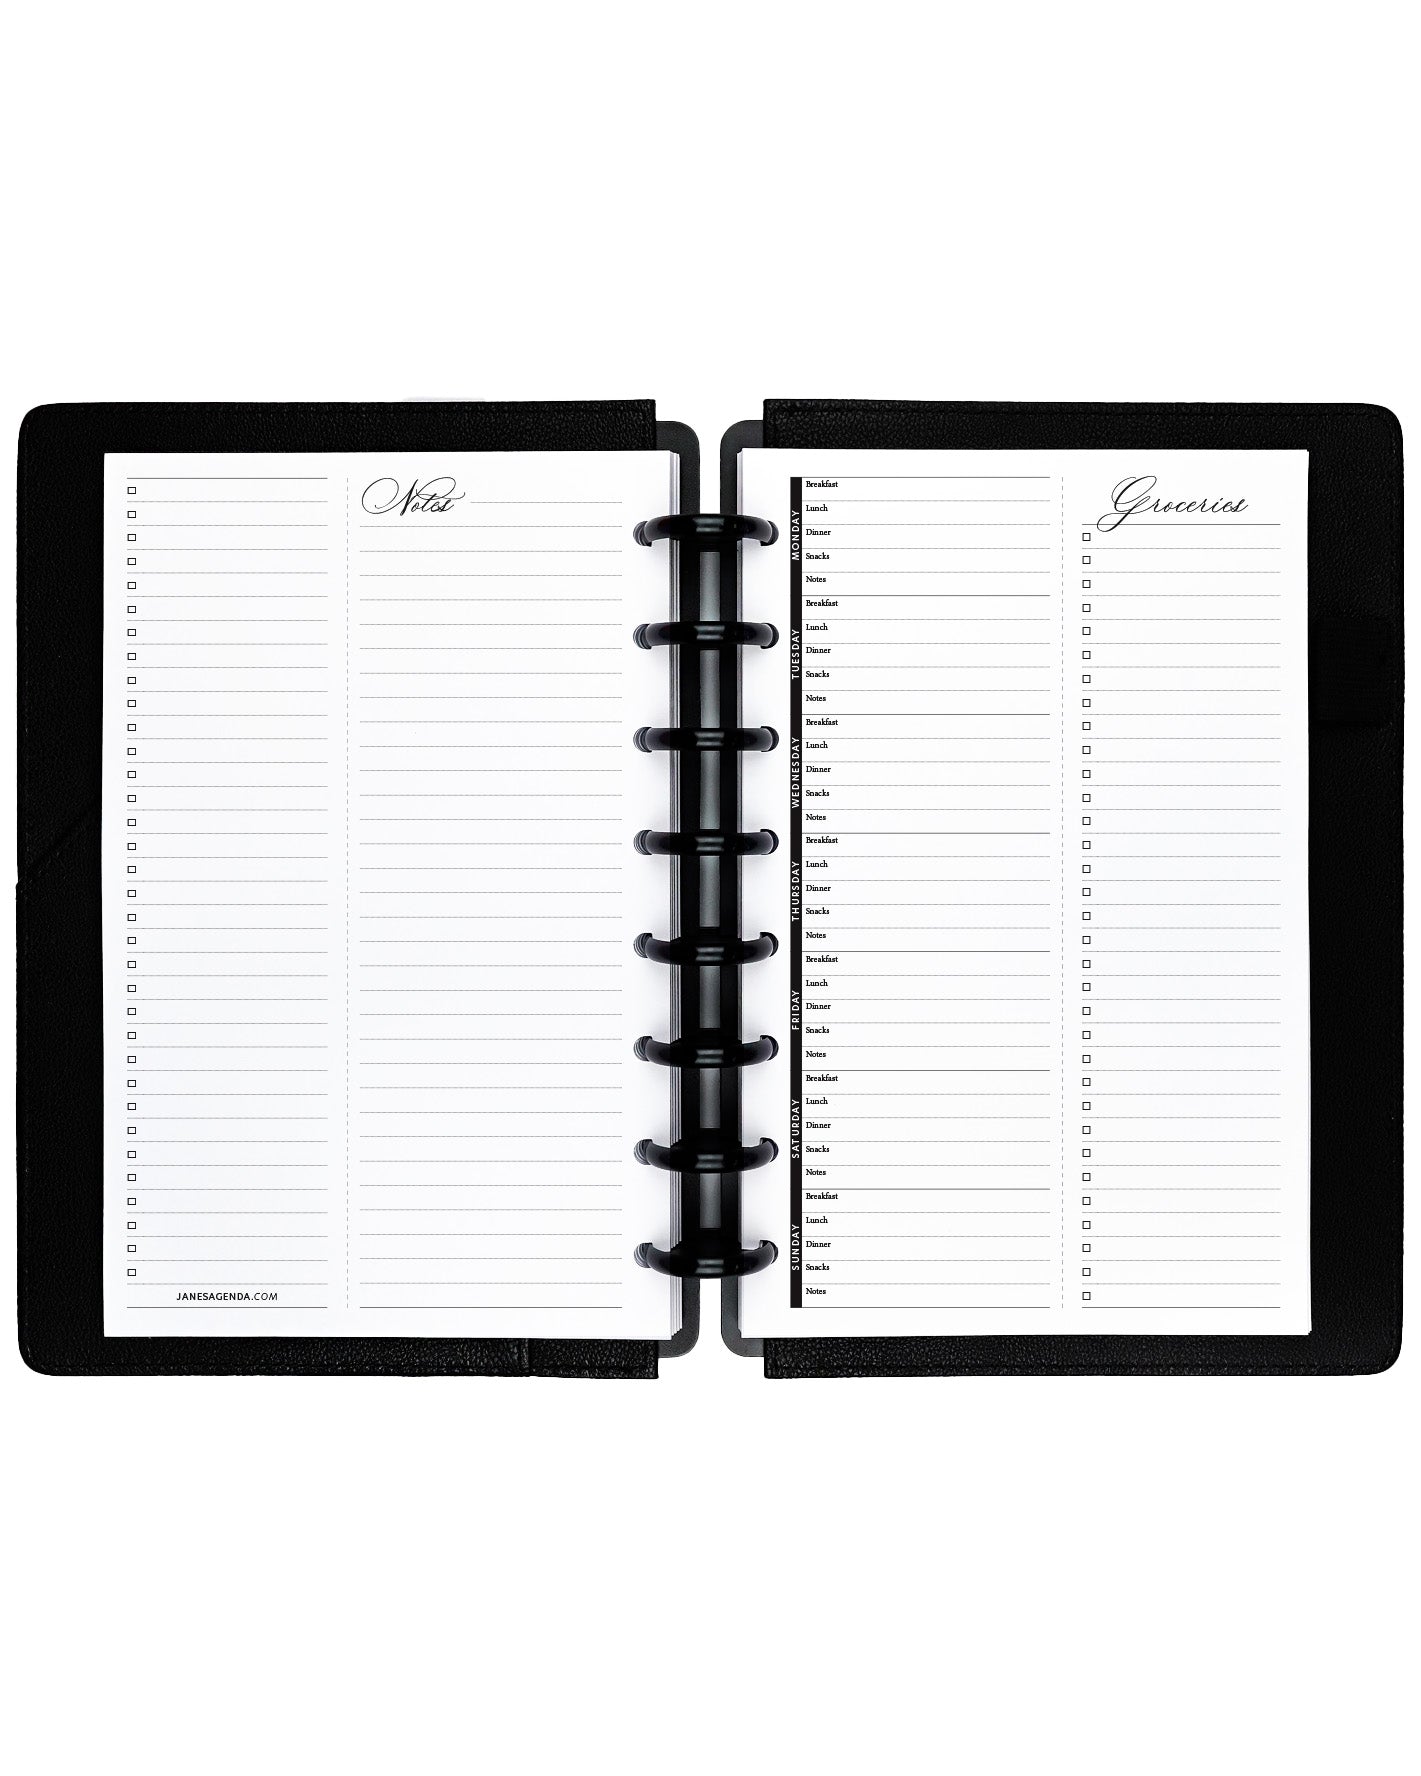 Grocery list and meal planning planner inserts for discbound planners by Jane's Agenda. 